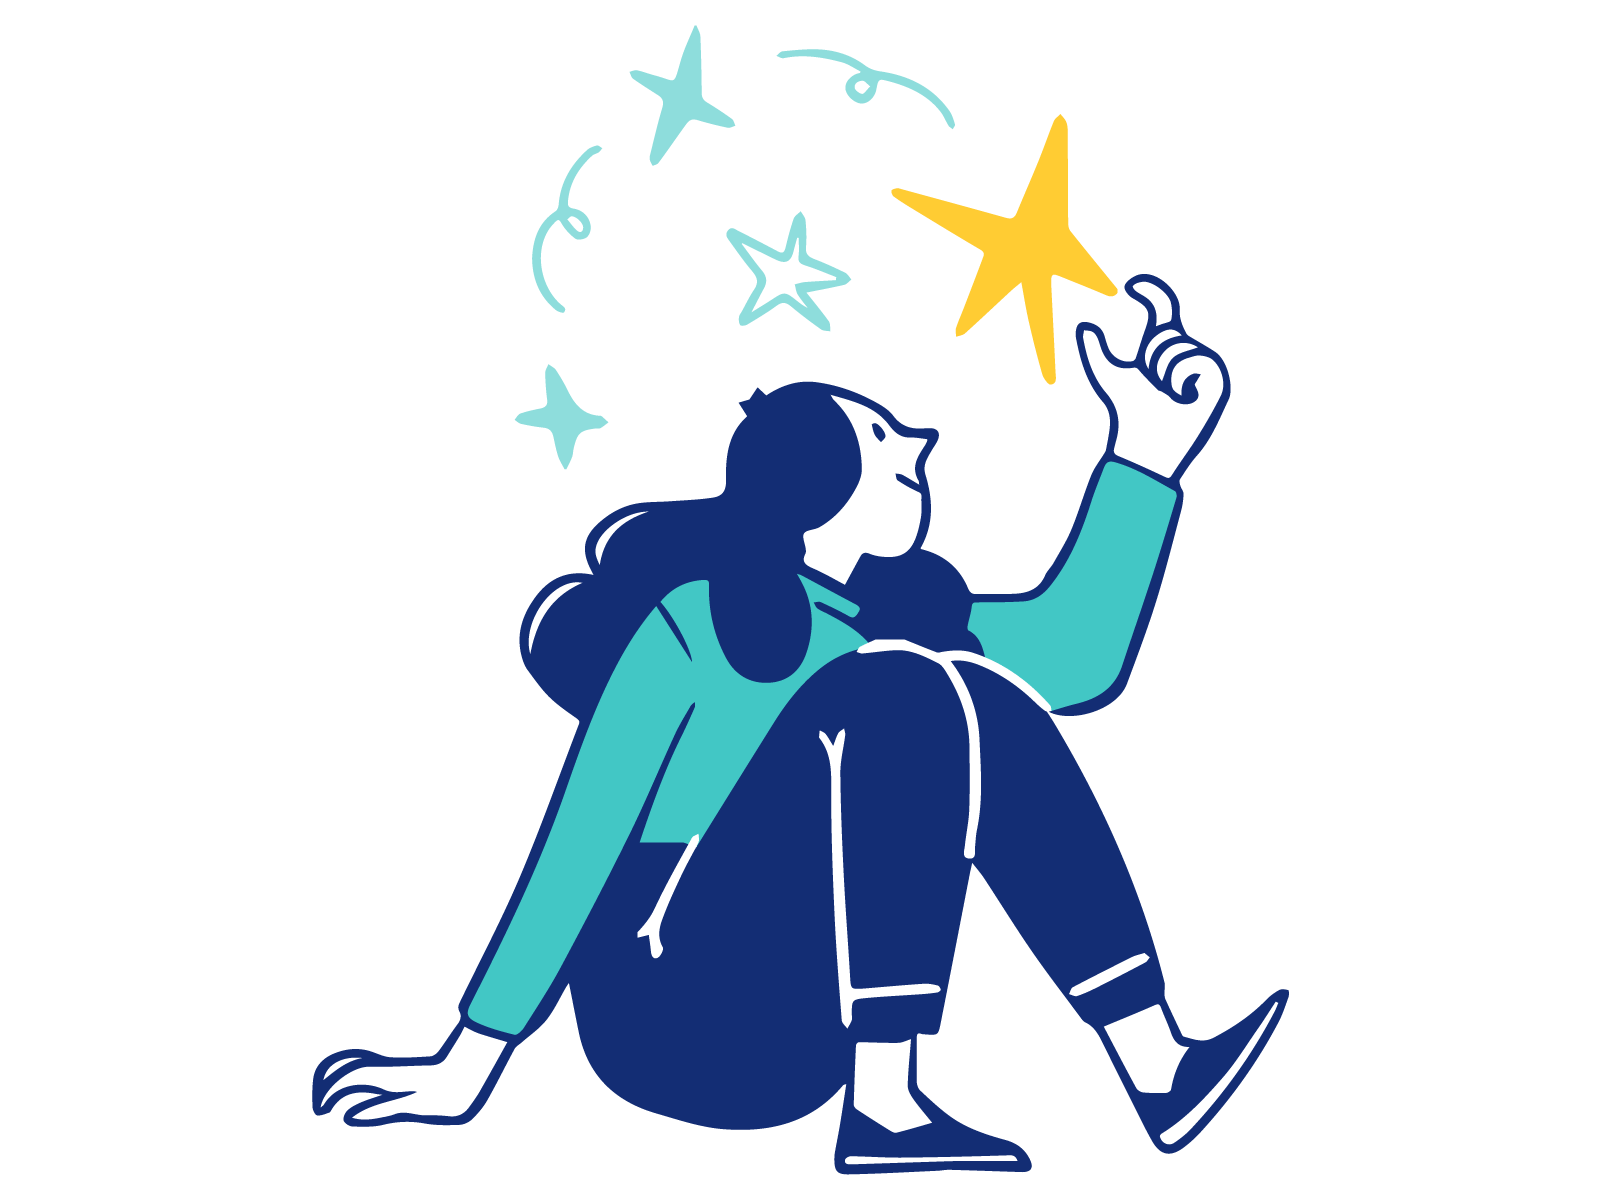 Crunchtime illustration of a woman daydreaming and holding a star